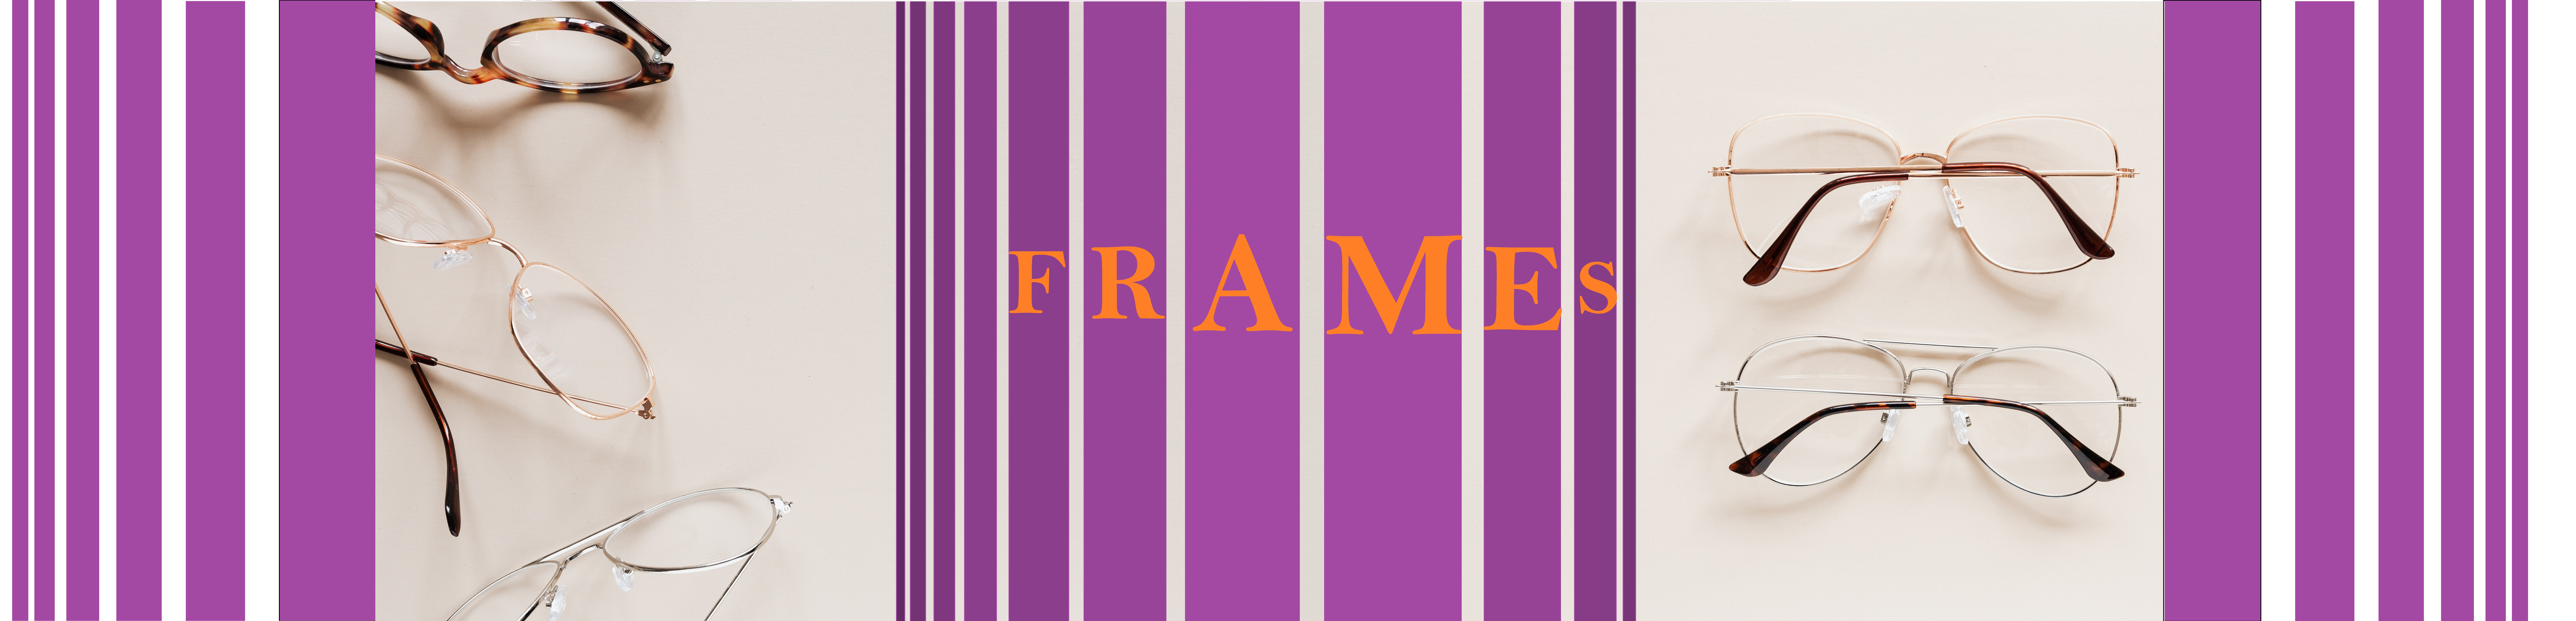 FRAME COLLECTION BANNER